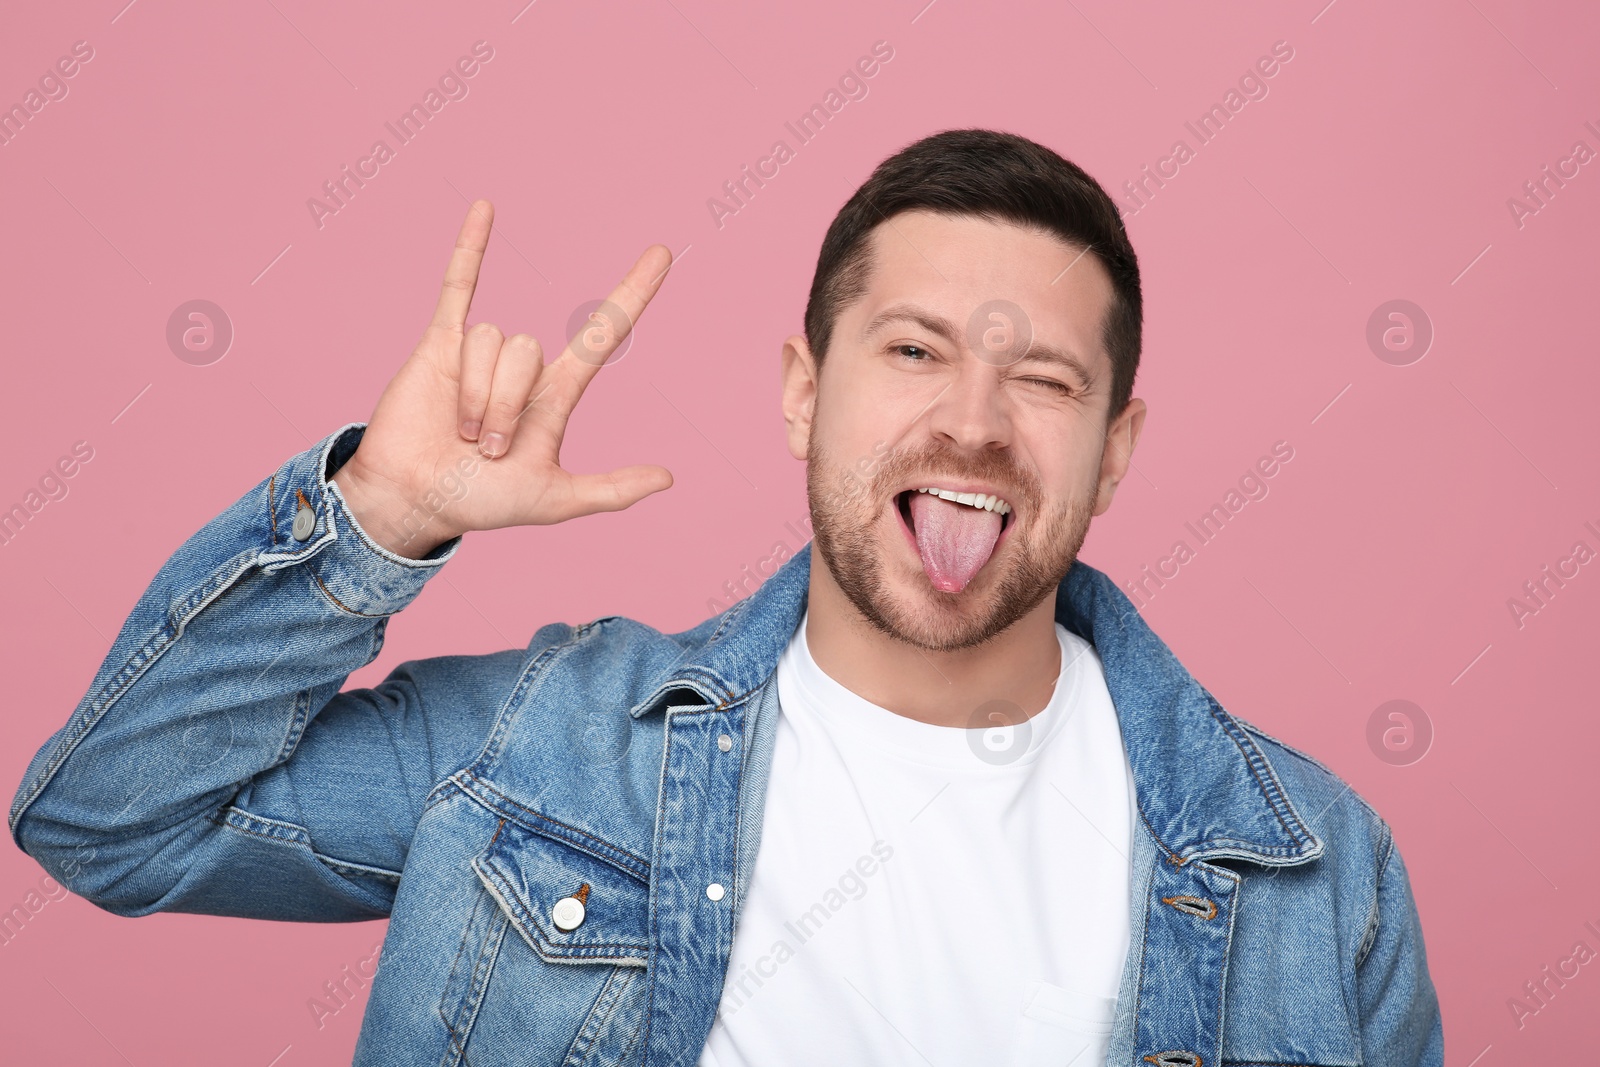 Photo of Happy man showing his tongue and rock gesture on pink background